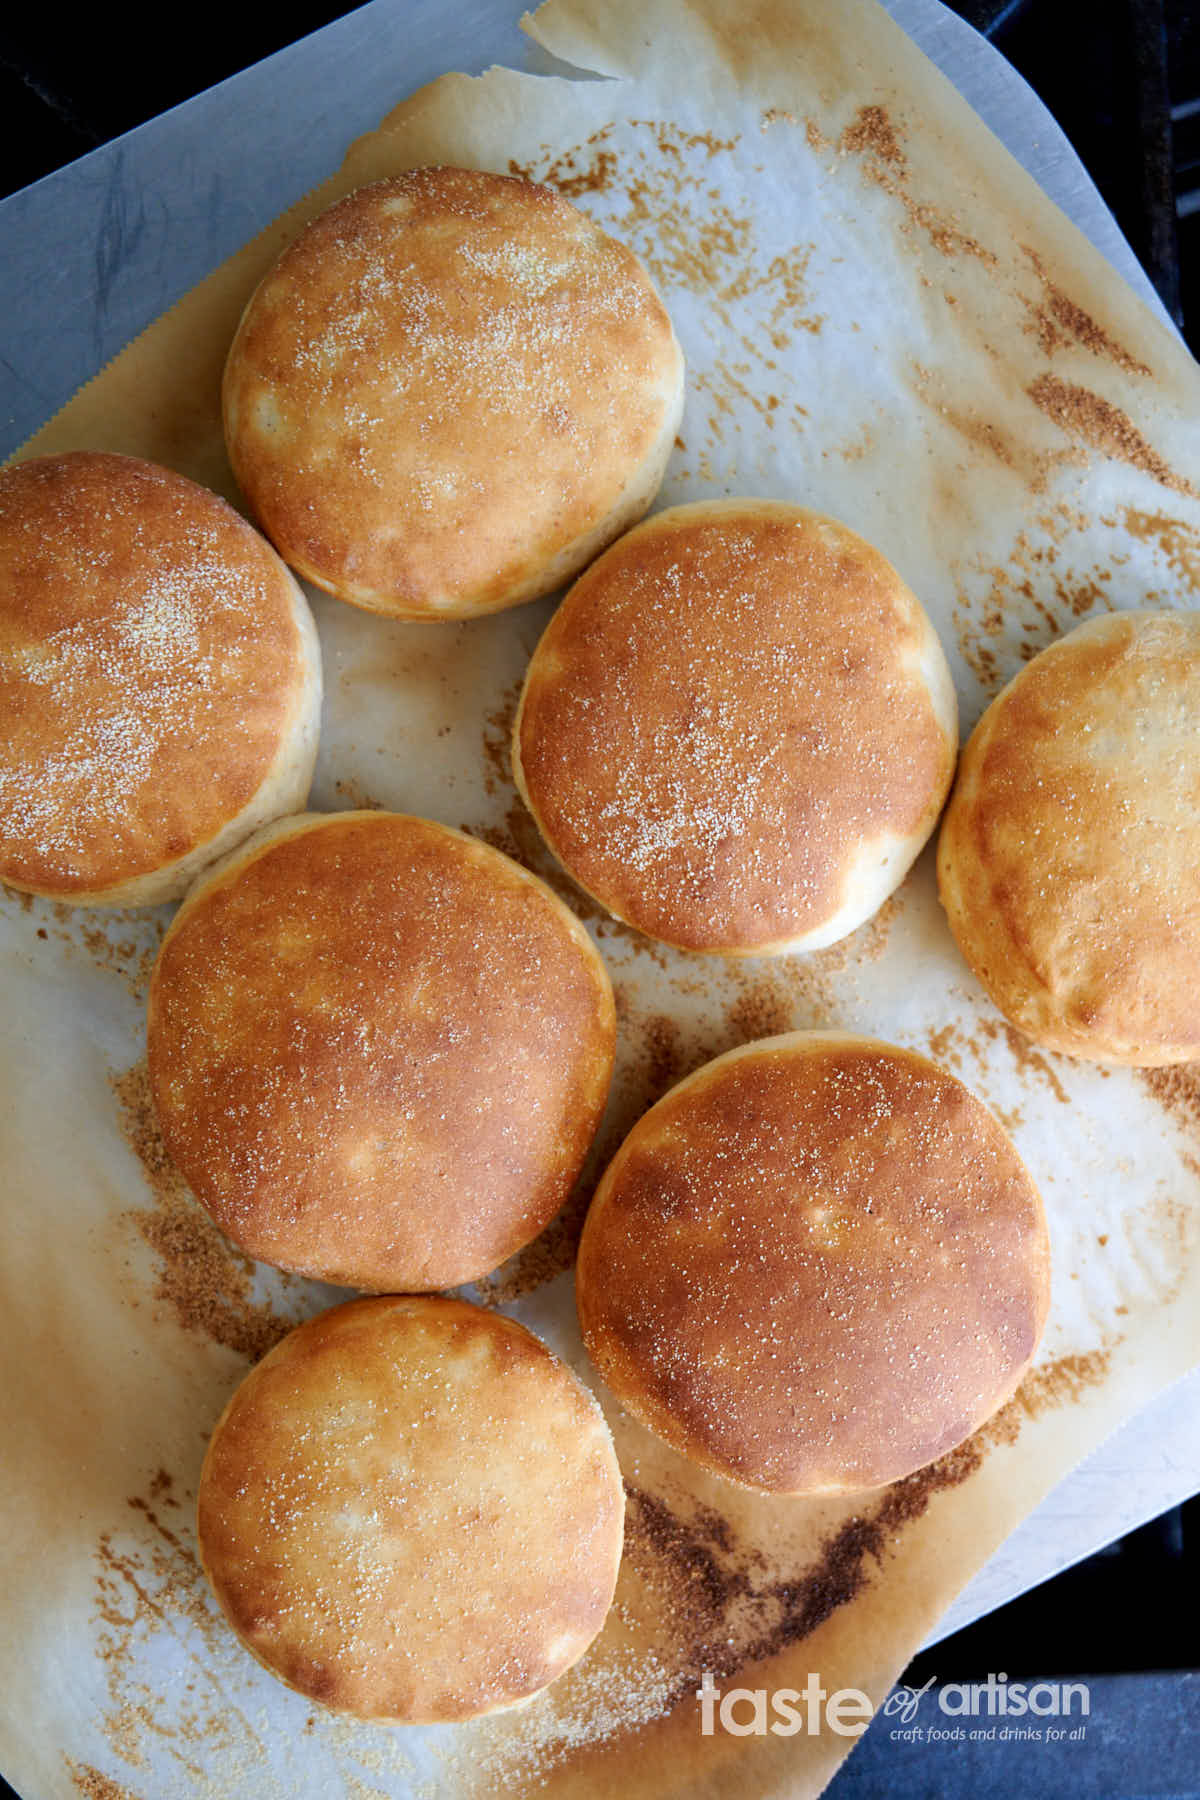 Baked Sourdough English Muffins - baked for only 7 minutes. Incredibly delicious and quick to make.